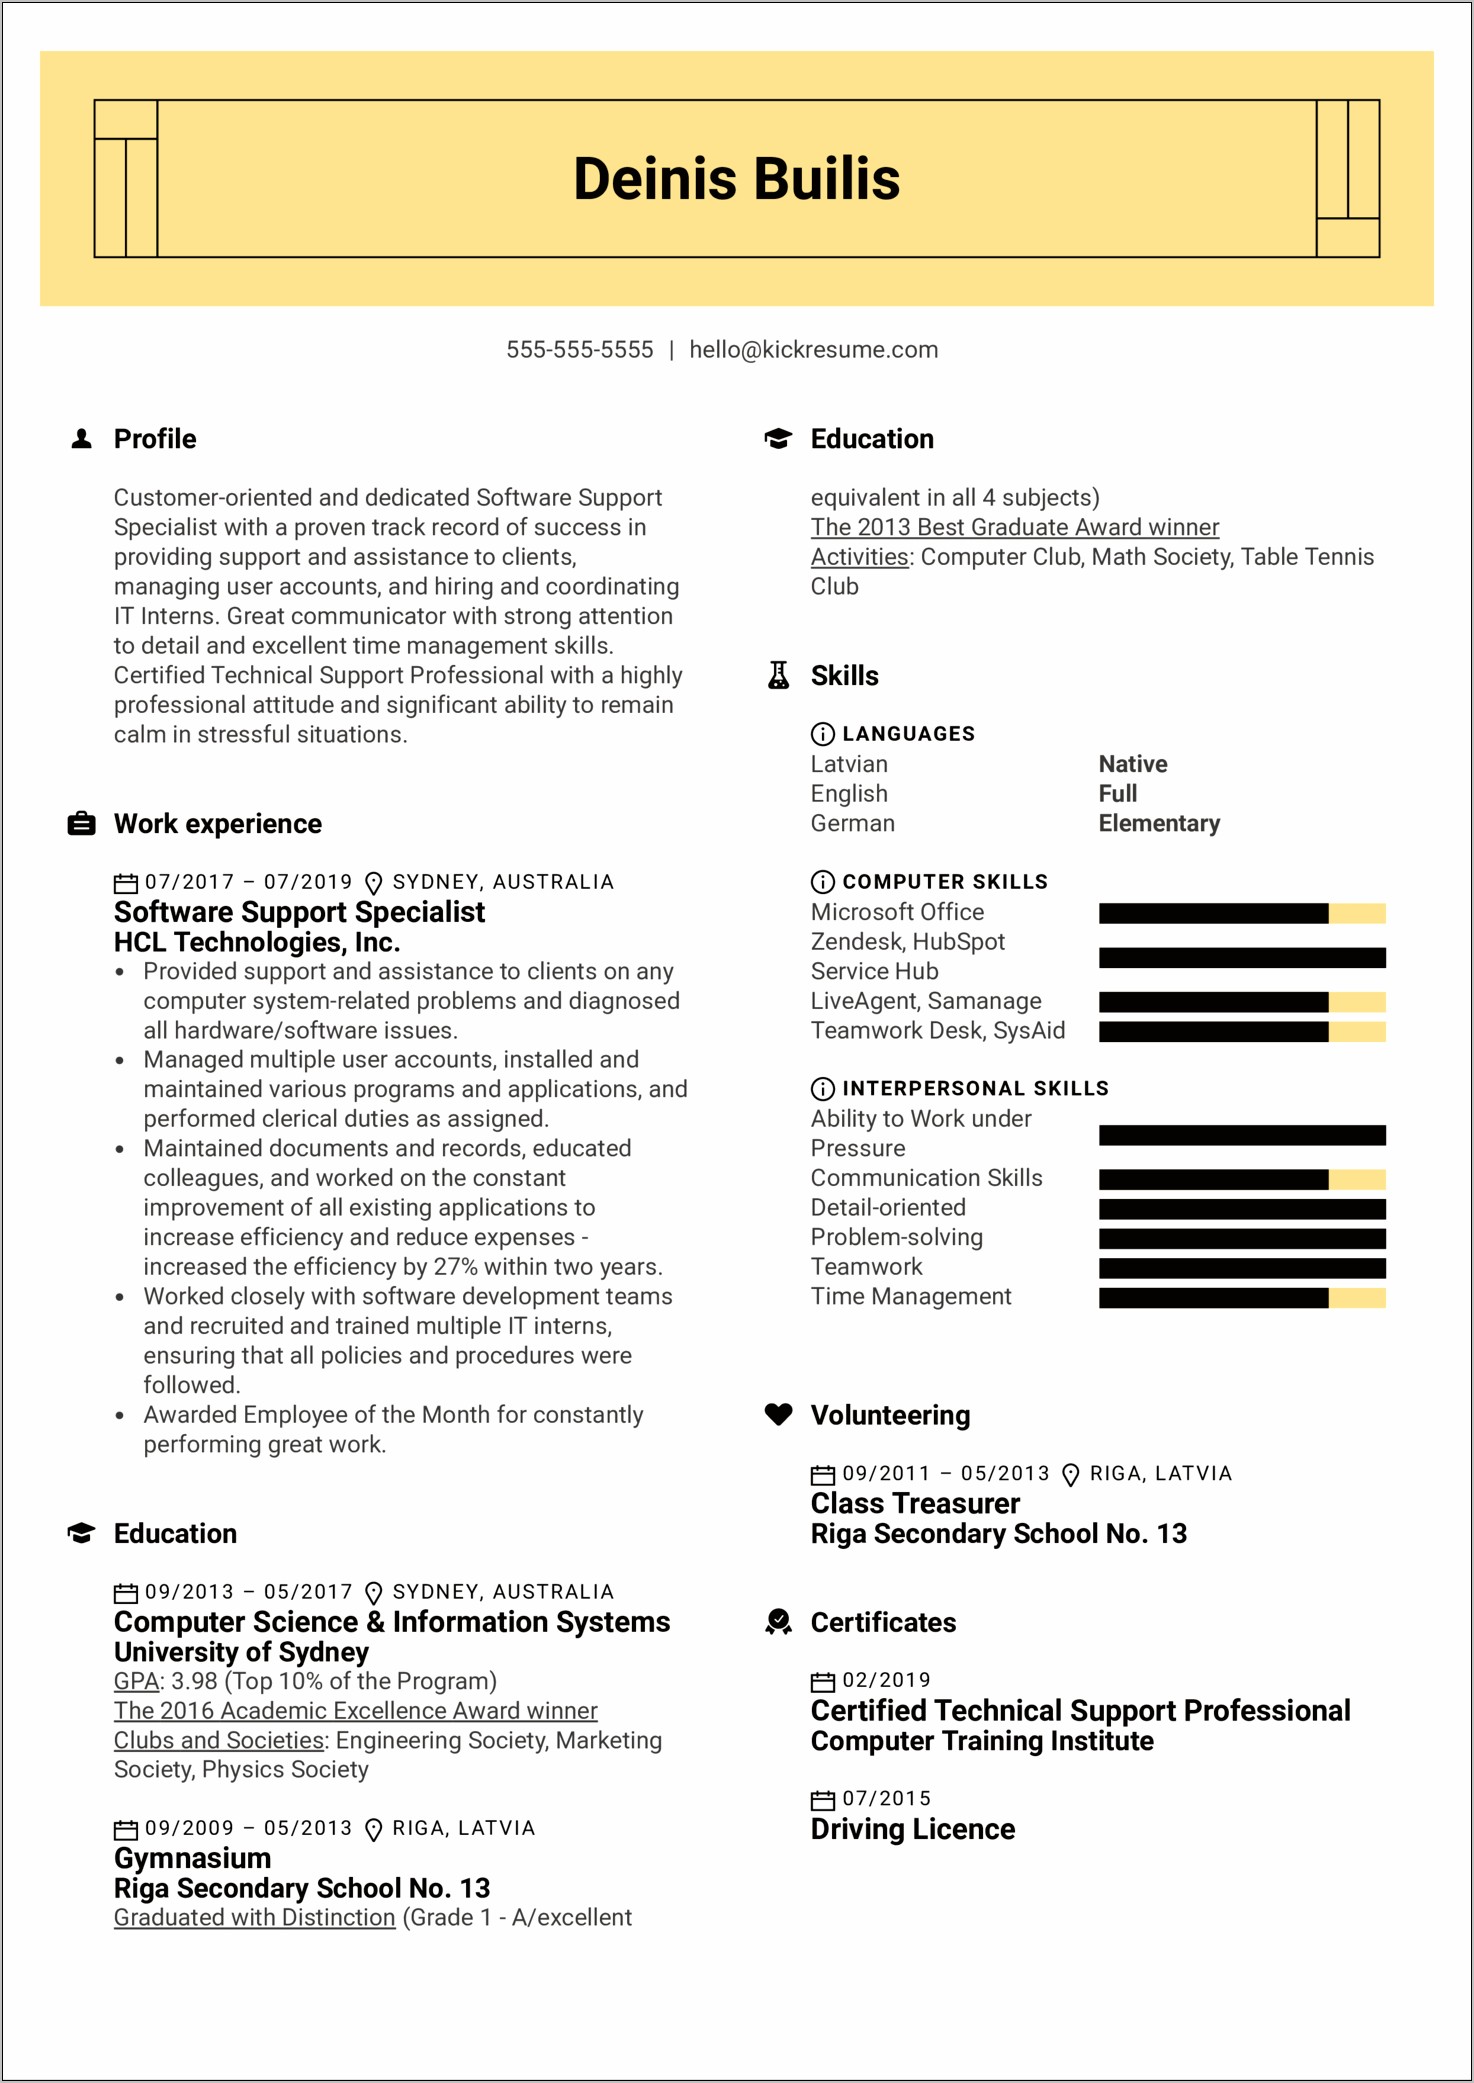 Resume Examples Technical Services Specialist